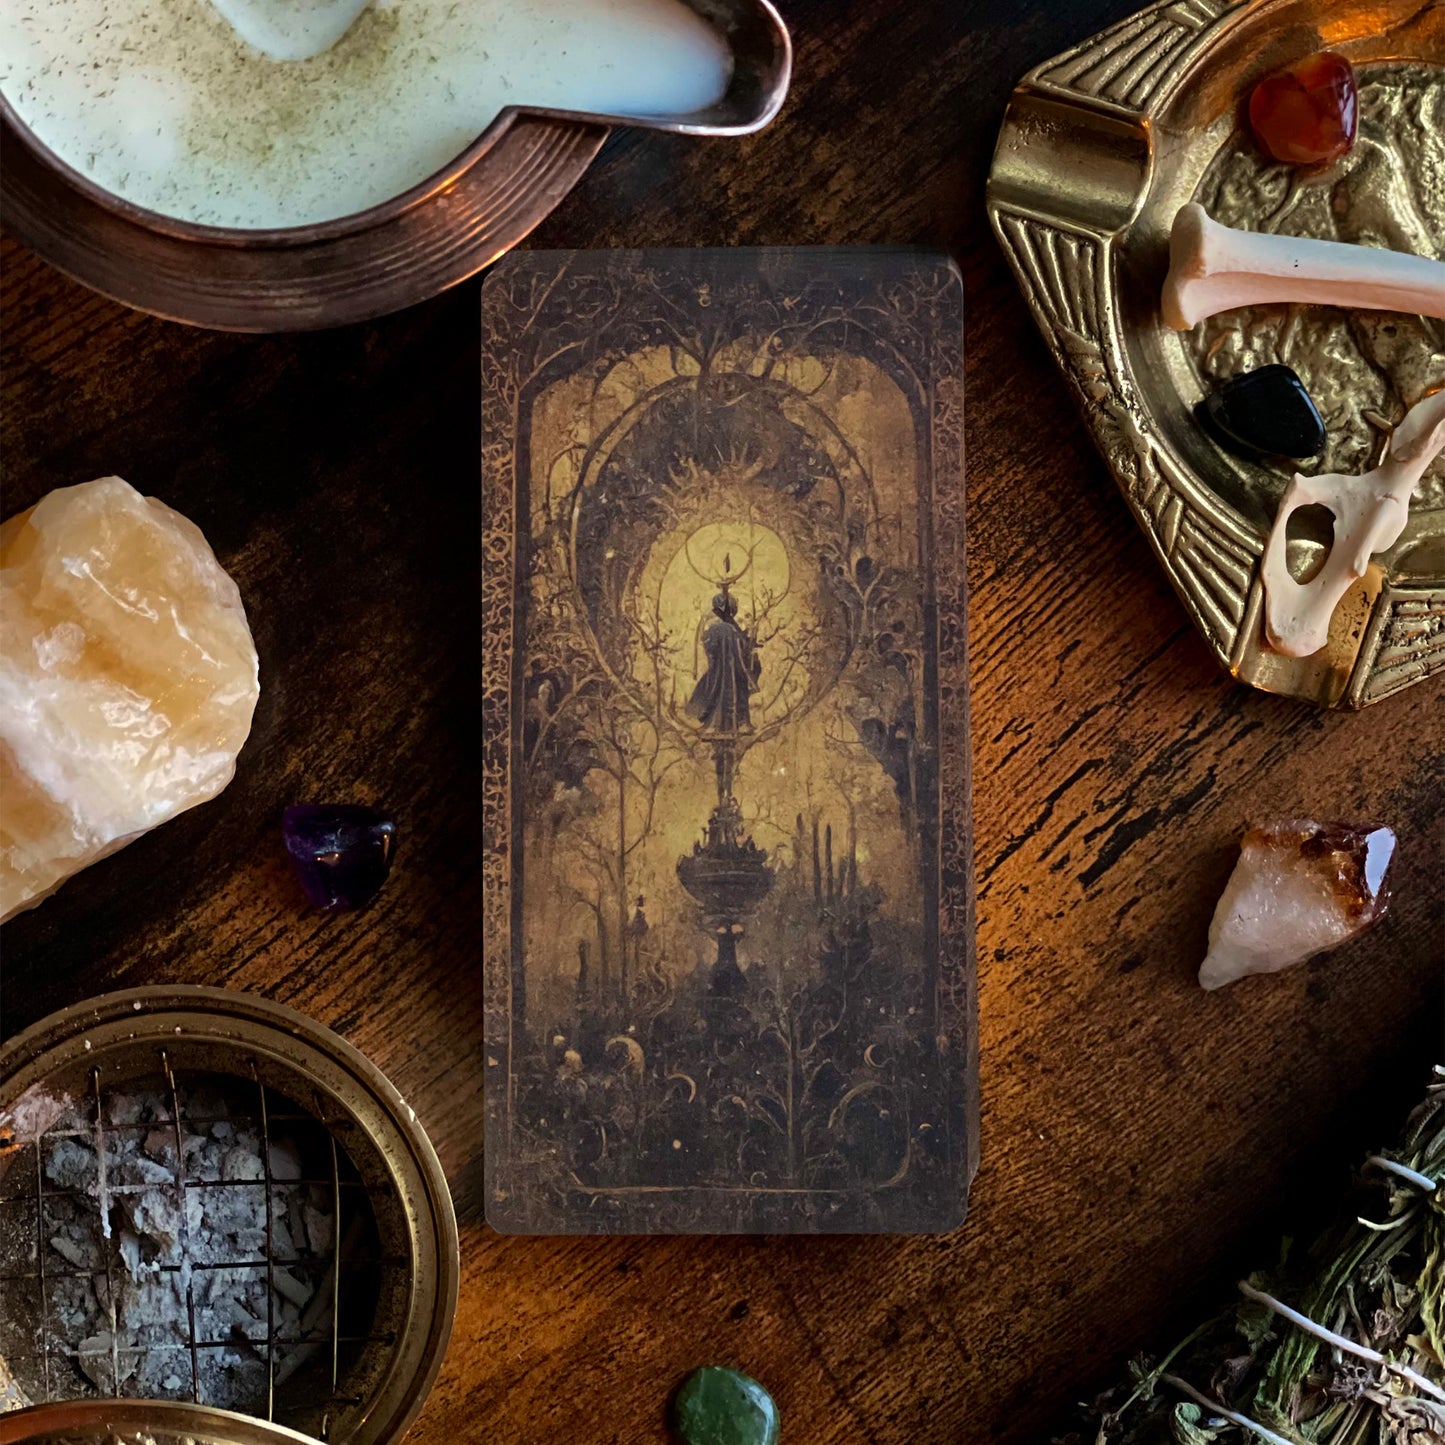 Back view of the tarot cards from the Shadow Work Tarot Deck, featuring a cohesive, antique design that complements the front artwork and adds to the deck's vintage appeal.